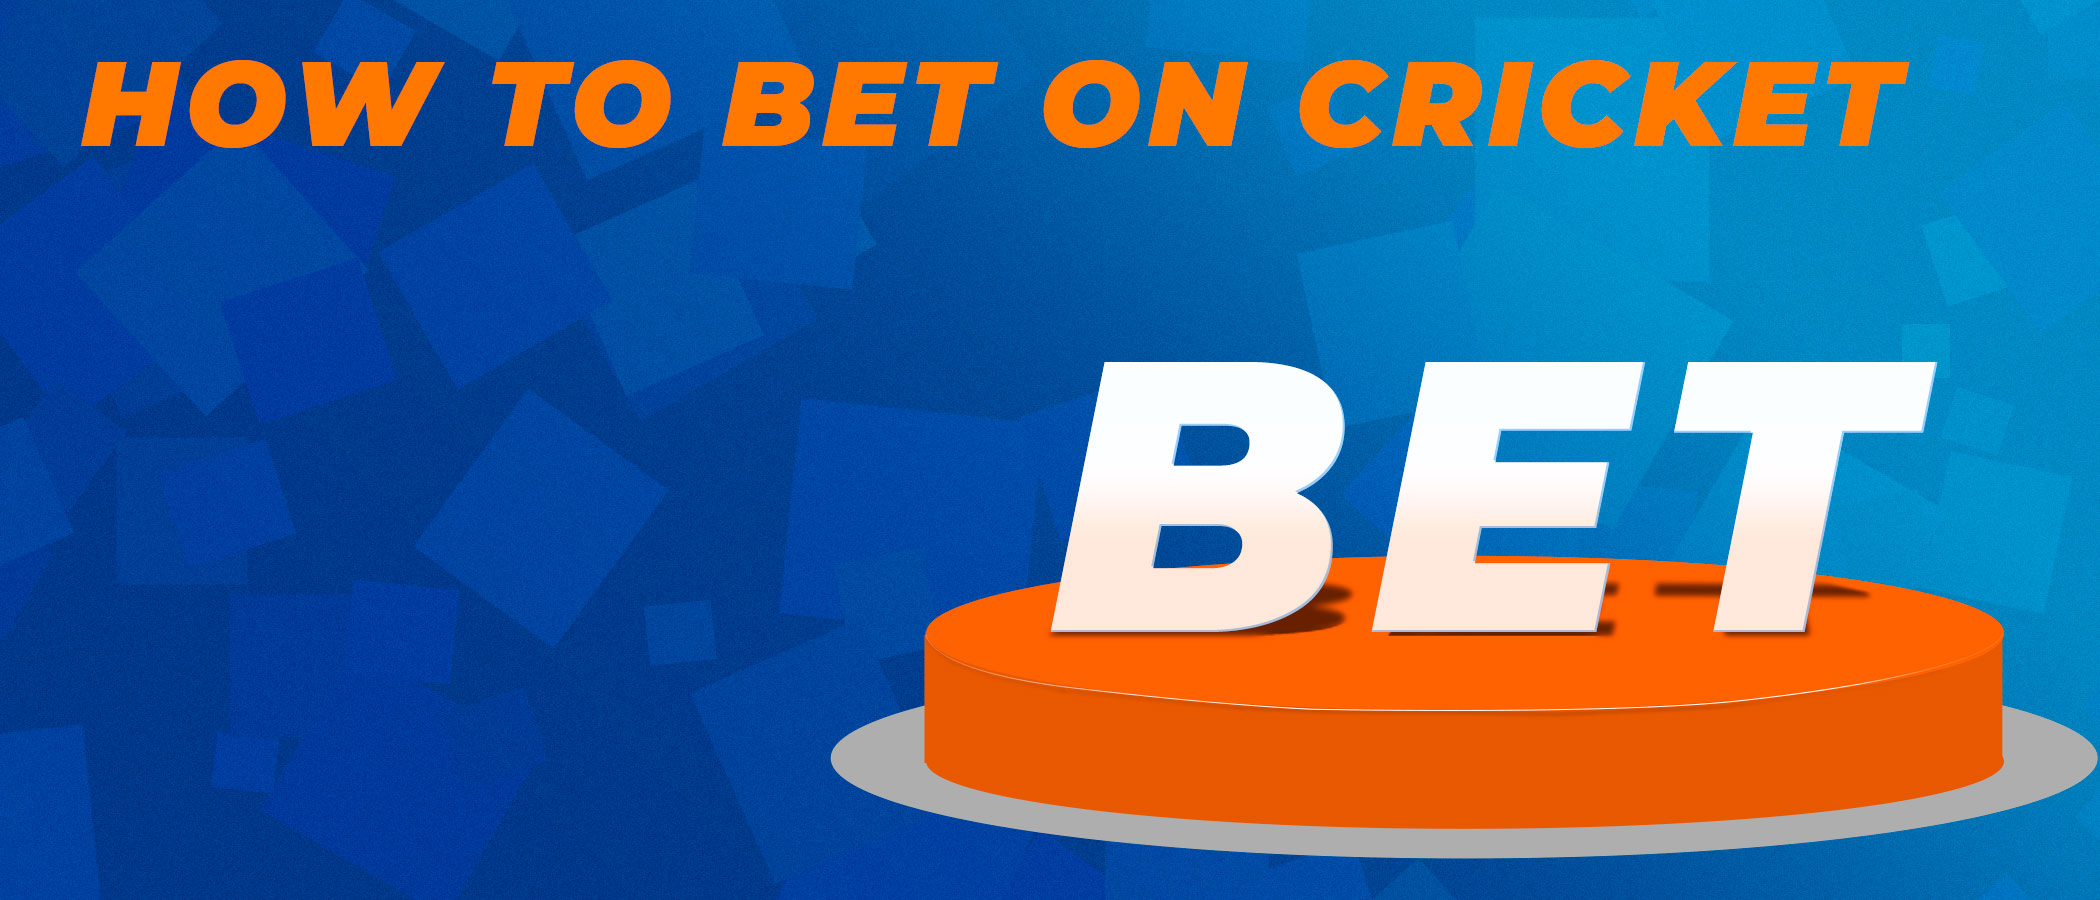 Step-by-step guide about how to bet on cricket.